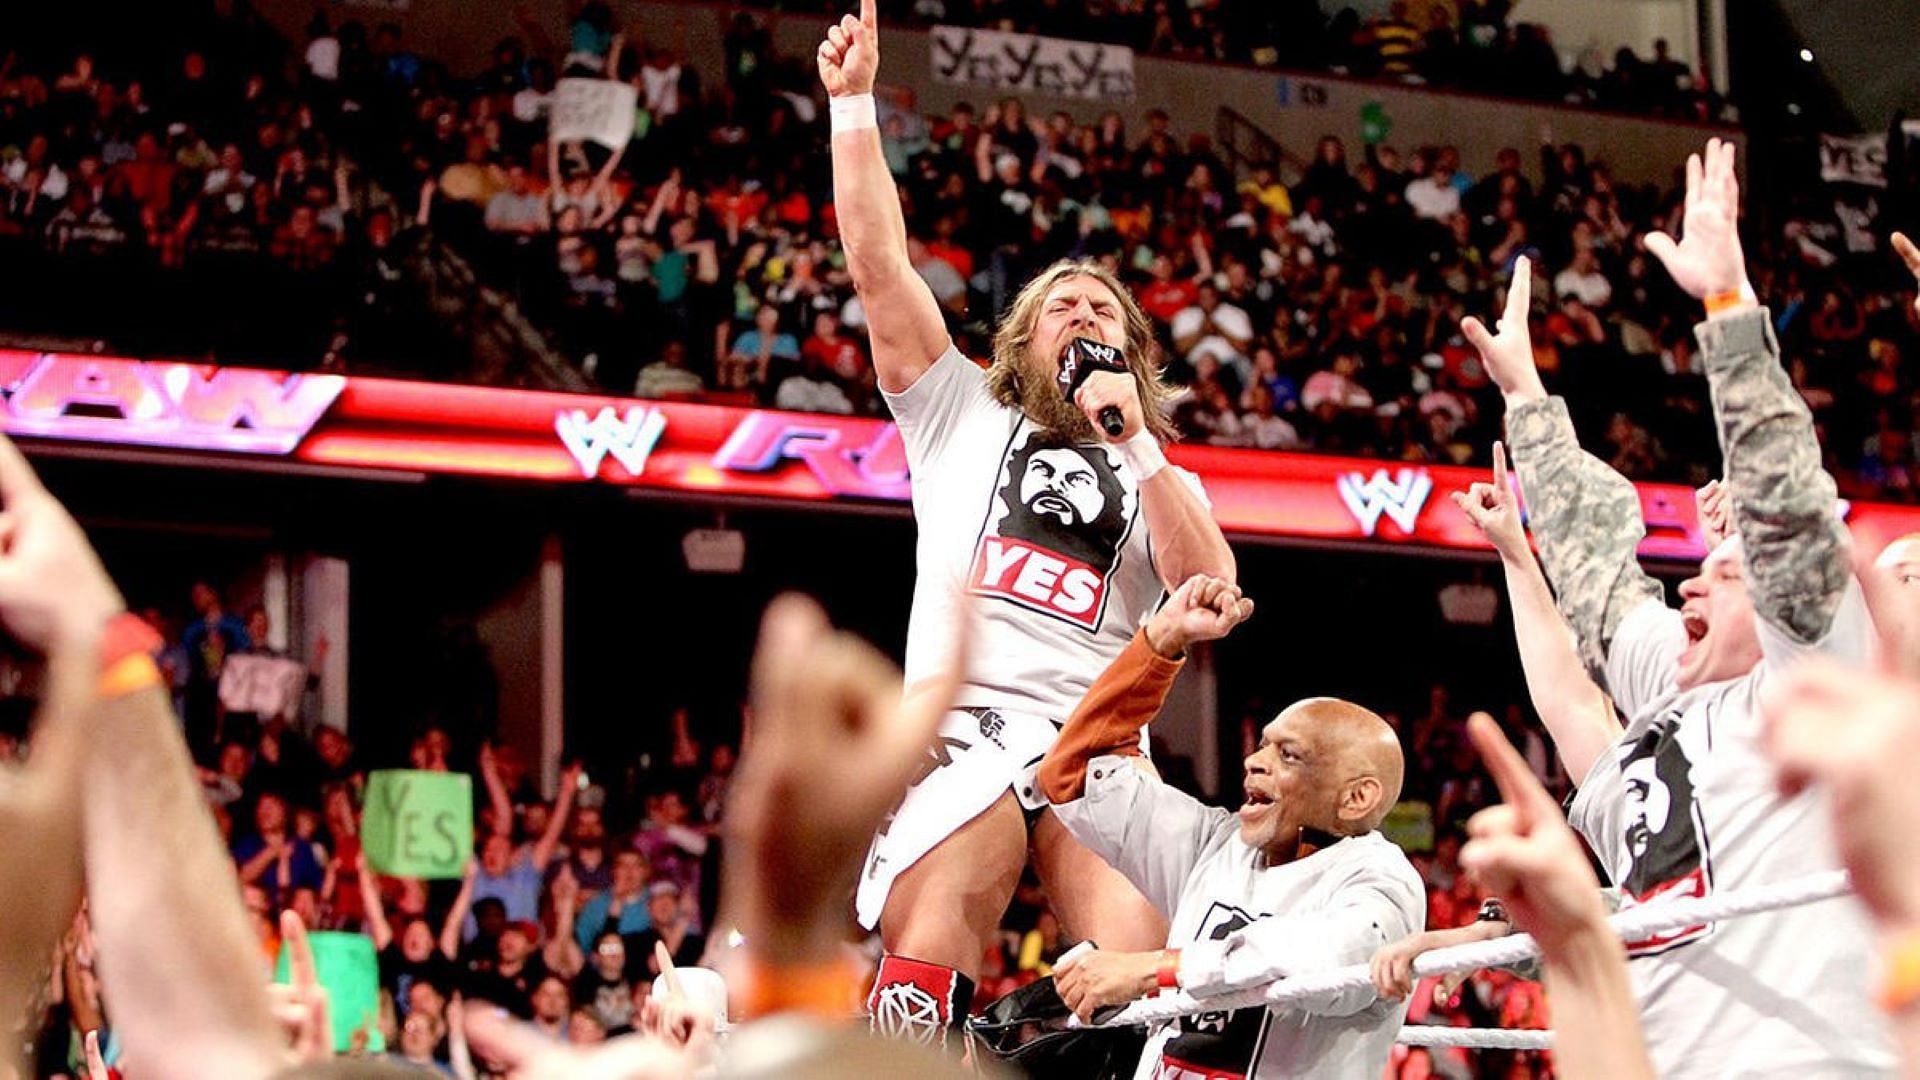 Fans were rabid for Daniel Bryan during the Yes! Movement